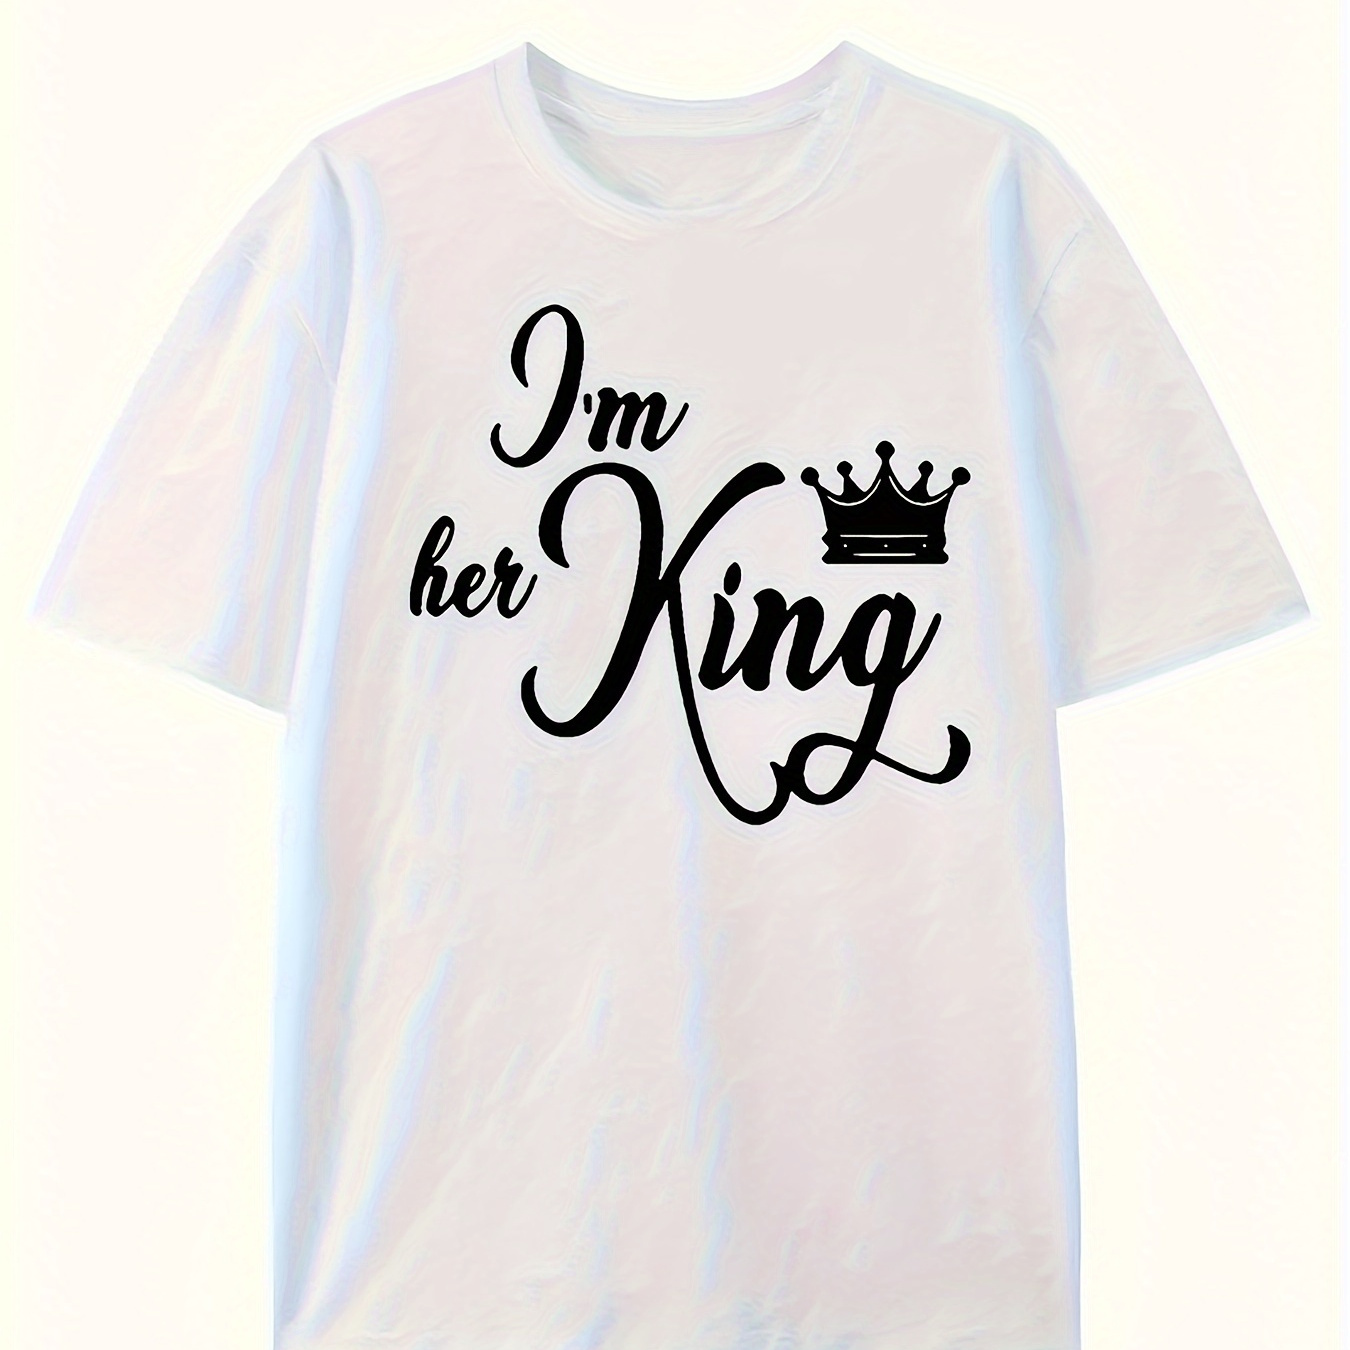 

Couple T-shirts, "king" Or "queen" Alphabet Print Men's 100% Cotton Crew Neck Short Sleeve T-shirt, Casual Summer T-shirt For Daily Wear And Vacation Resorts